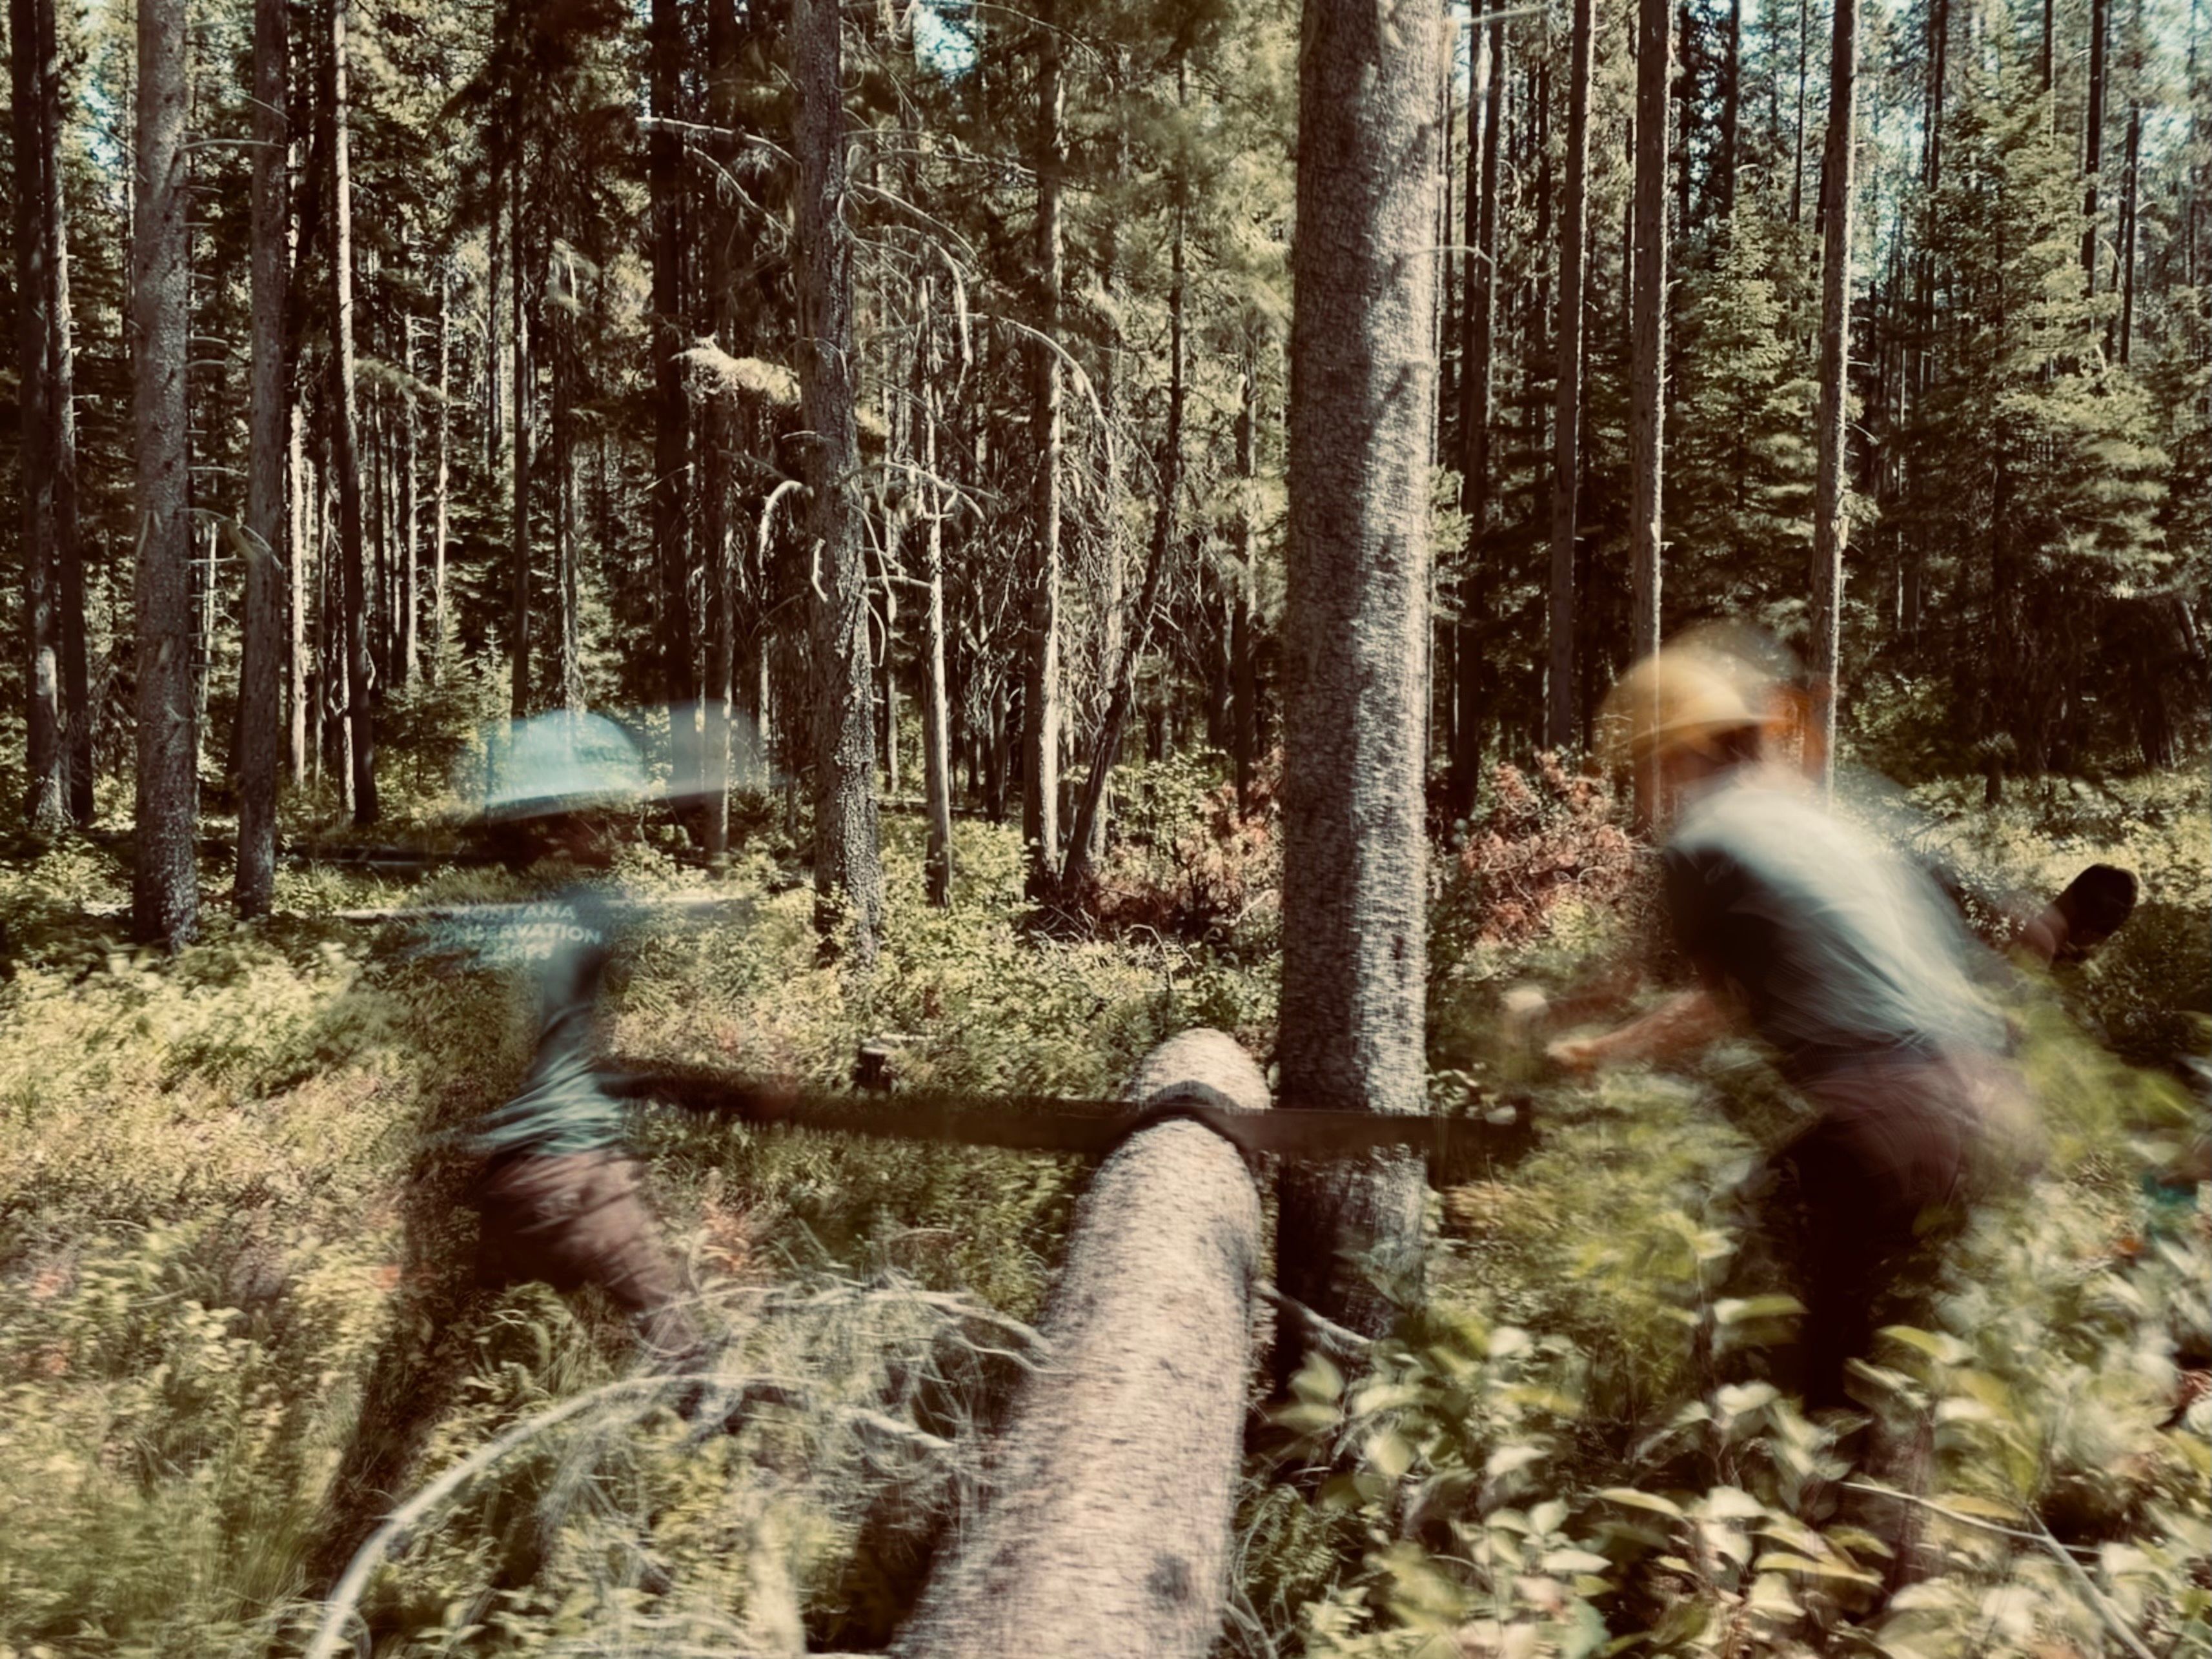 Two crew members are blurred in action as they crosscut a log